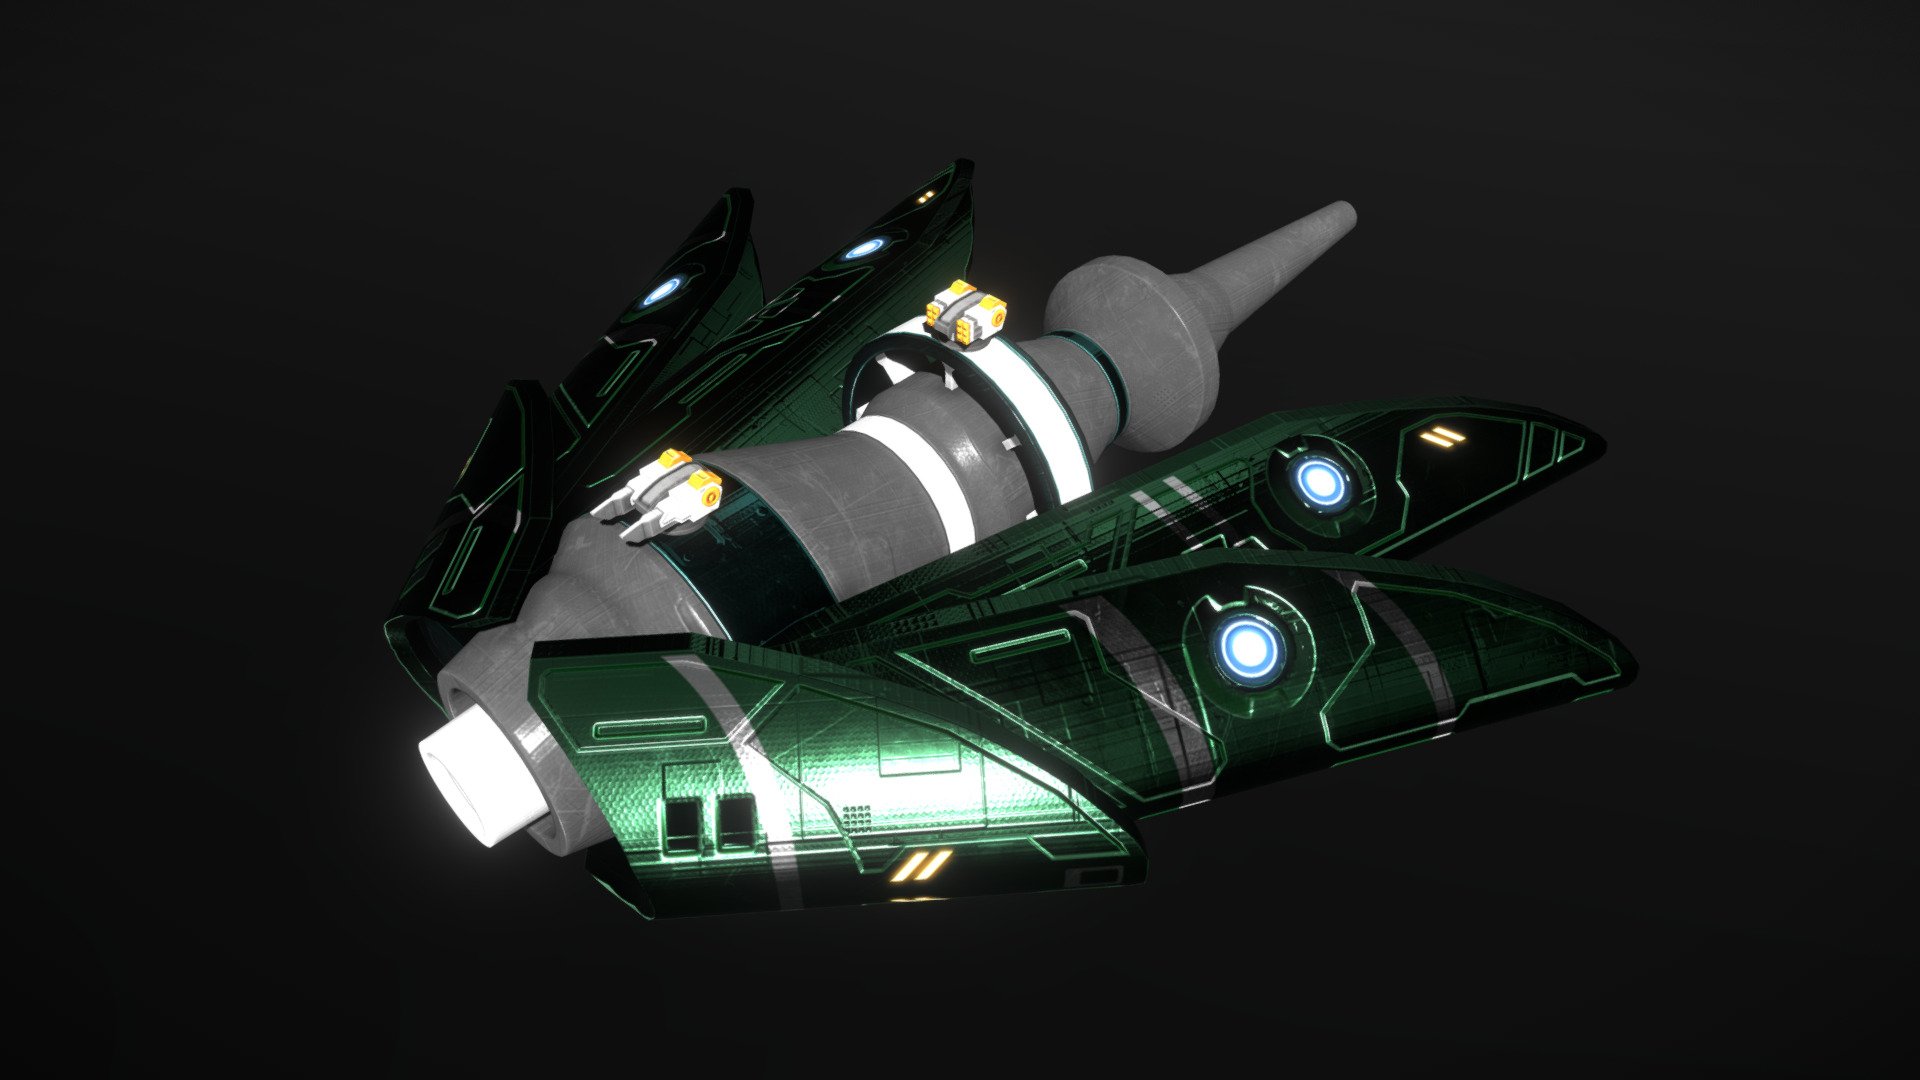 This is a model of a low-poly and game-ready scifi spaceship. 

The weapons are separate meshes and can be animated with a keyframe animation tool. The weapon loadout can be changed too.

The model comes with several differently colored texture sets. The PSD file with intact layers is included.

Please note: The textures in the Sketchfab viewer have a reduced resolution to improve Sketchfab loading speed.

If you have bought this model please make sure to download the “additional file”.  It contains FBX and OBJ meshes, full resolution textures and the source PSDs with intact layers. The meshes are separate and can be animated (e.g. firing animations for gun barrels, rotating turrets, etc) 3d model